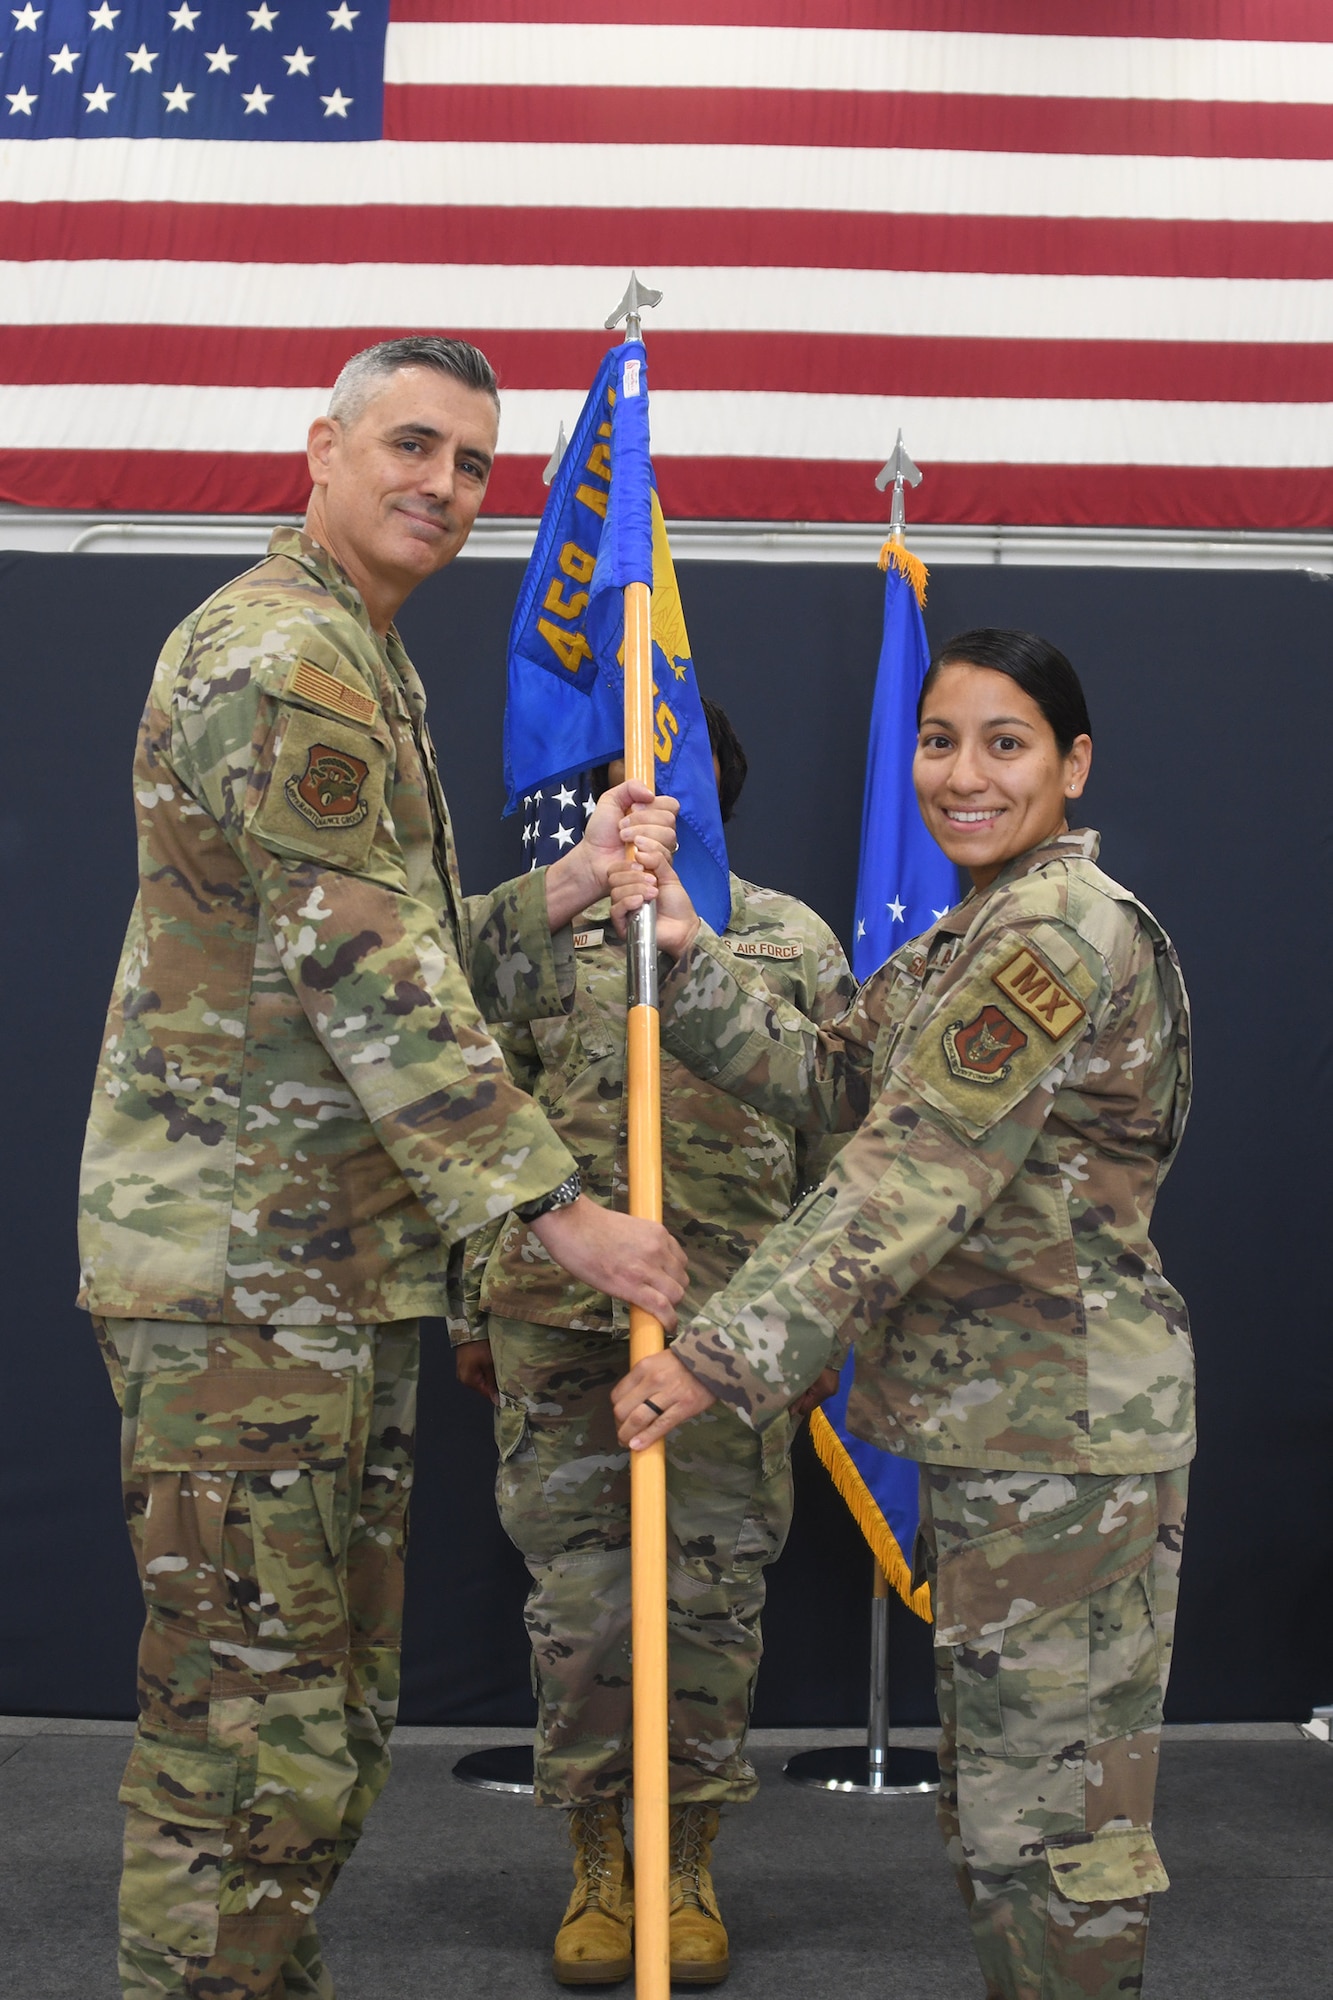 Sewejkis takes command of MXS